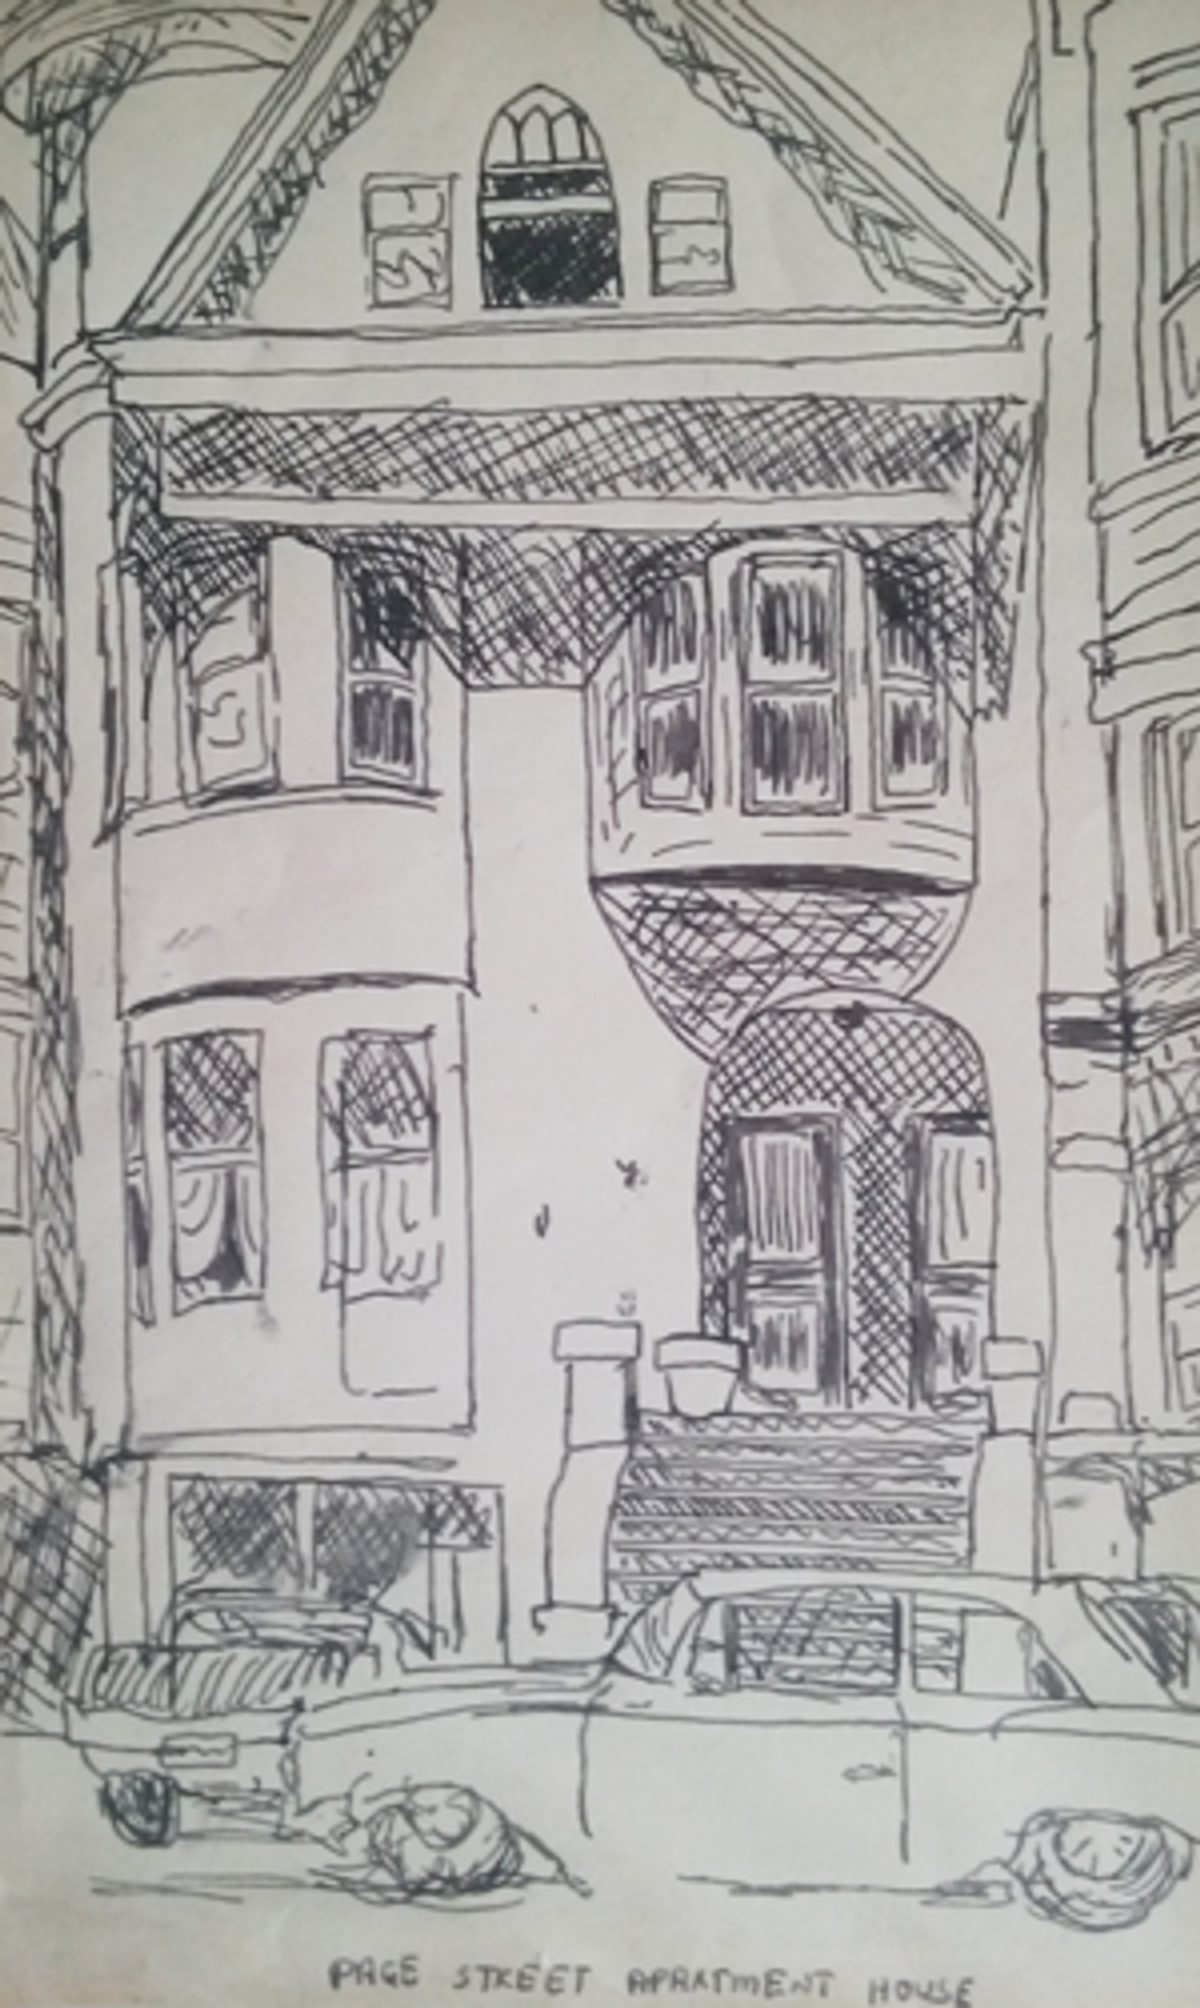 Illustration by the author of his apartment at 1686 Page Street, Haight-Ashbury, San Francisco, 1967.